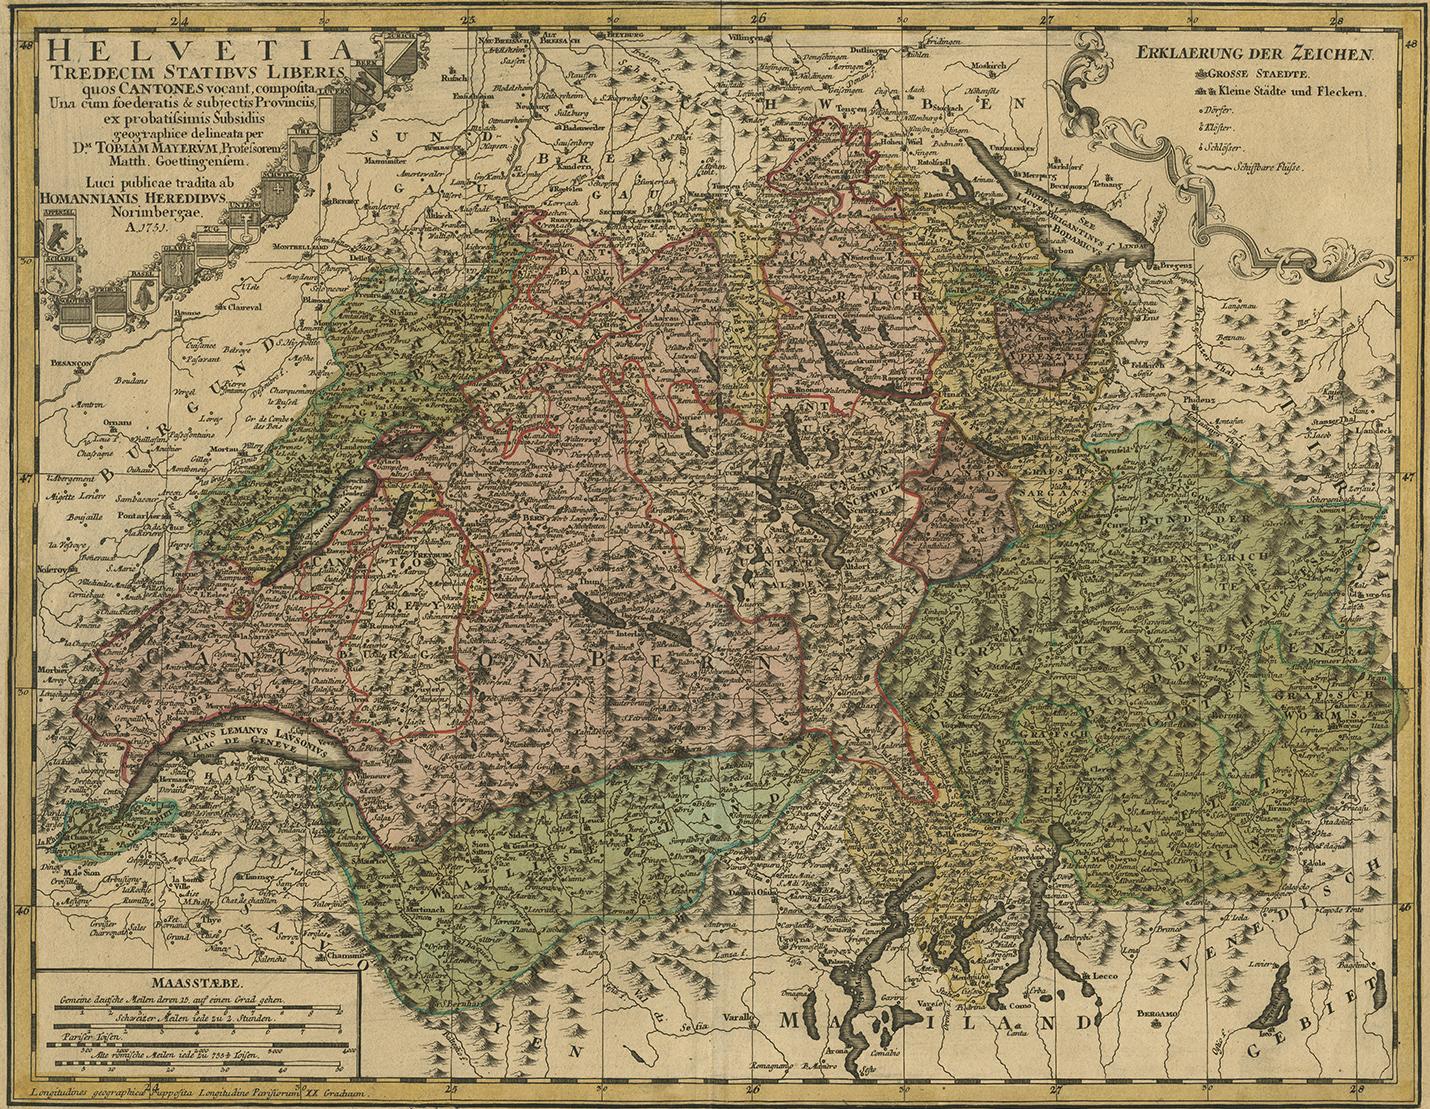 Decorative example of Homann's map of Switzerland, with decorative cartouche and the coat of arms of each of the 13 Cantons.